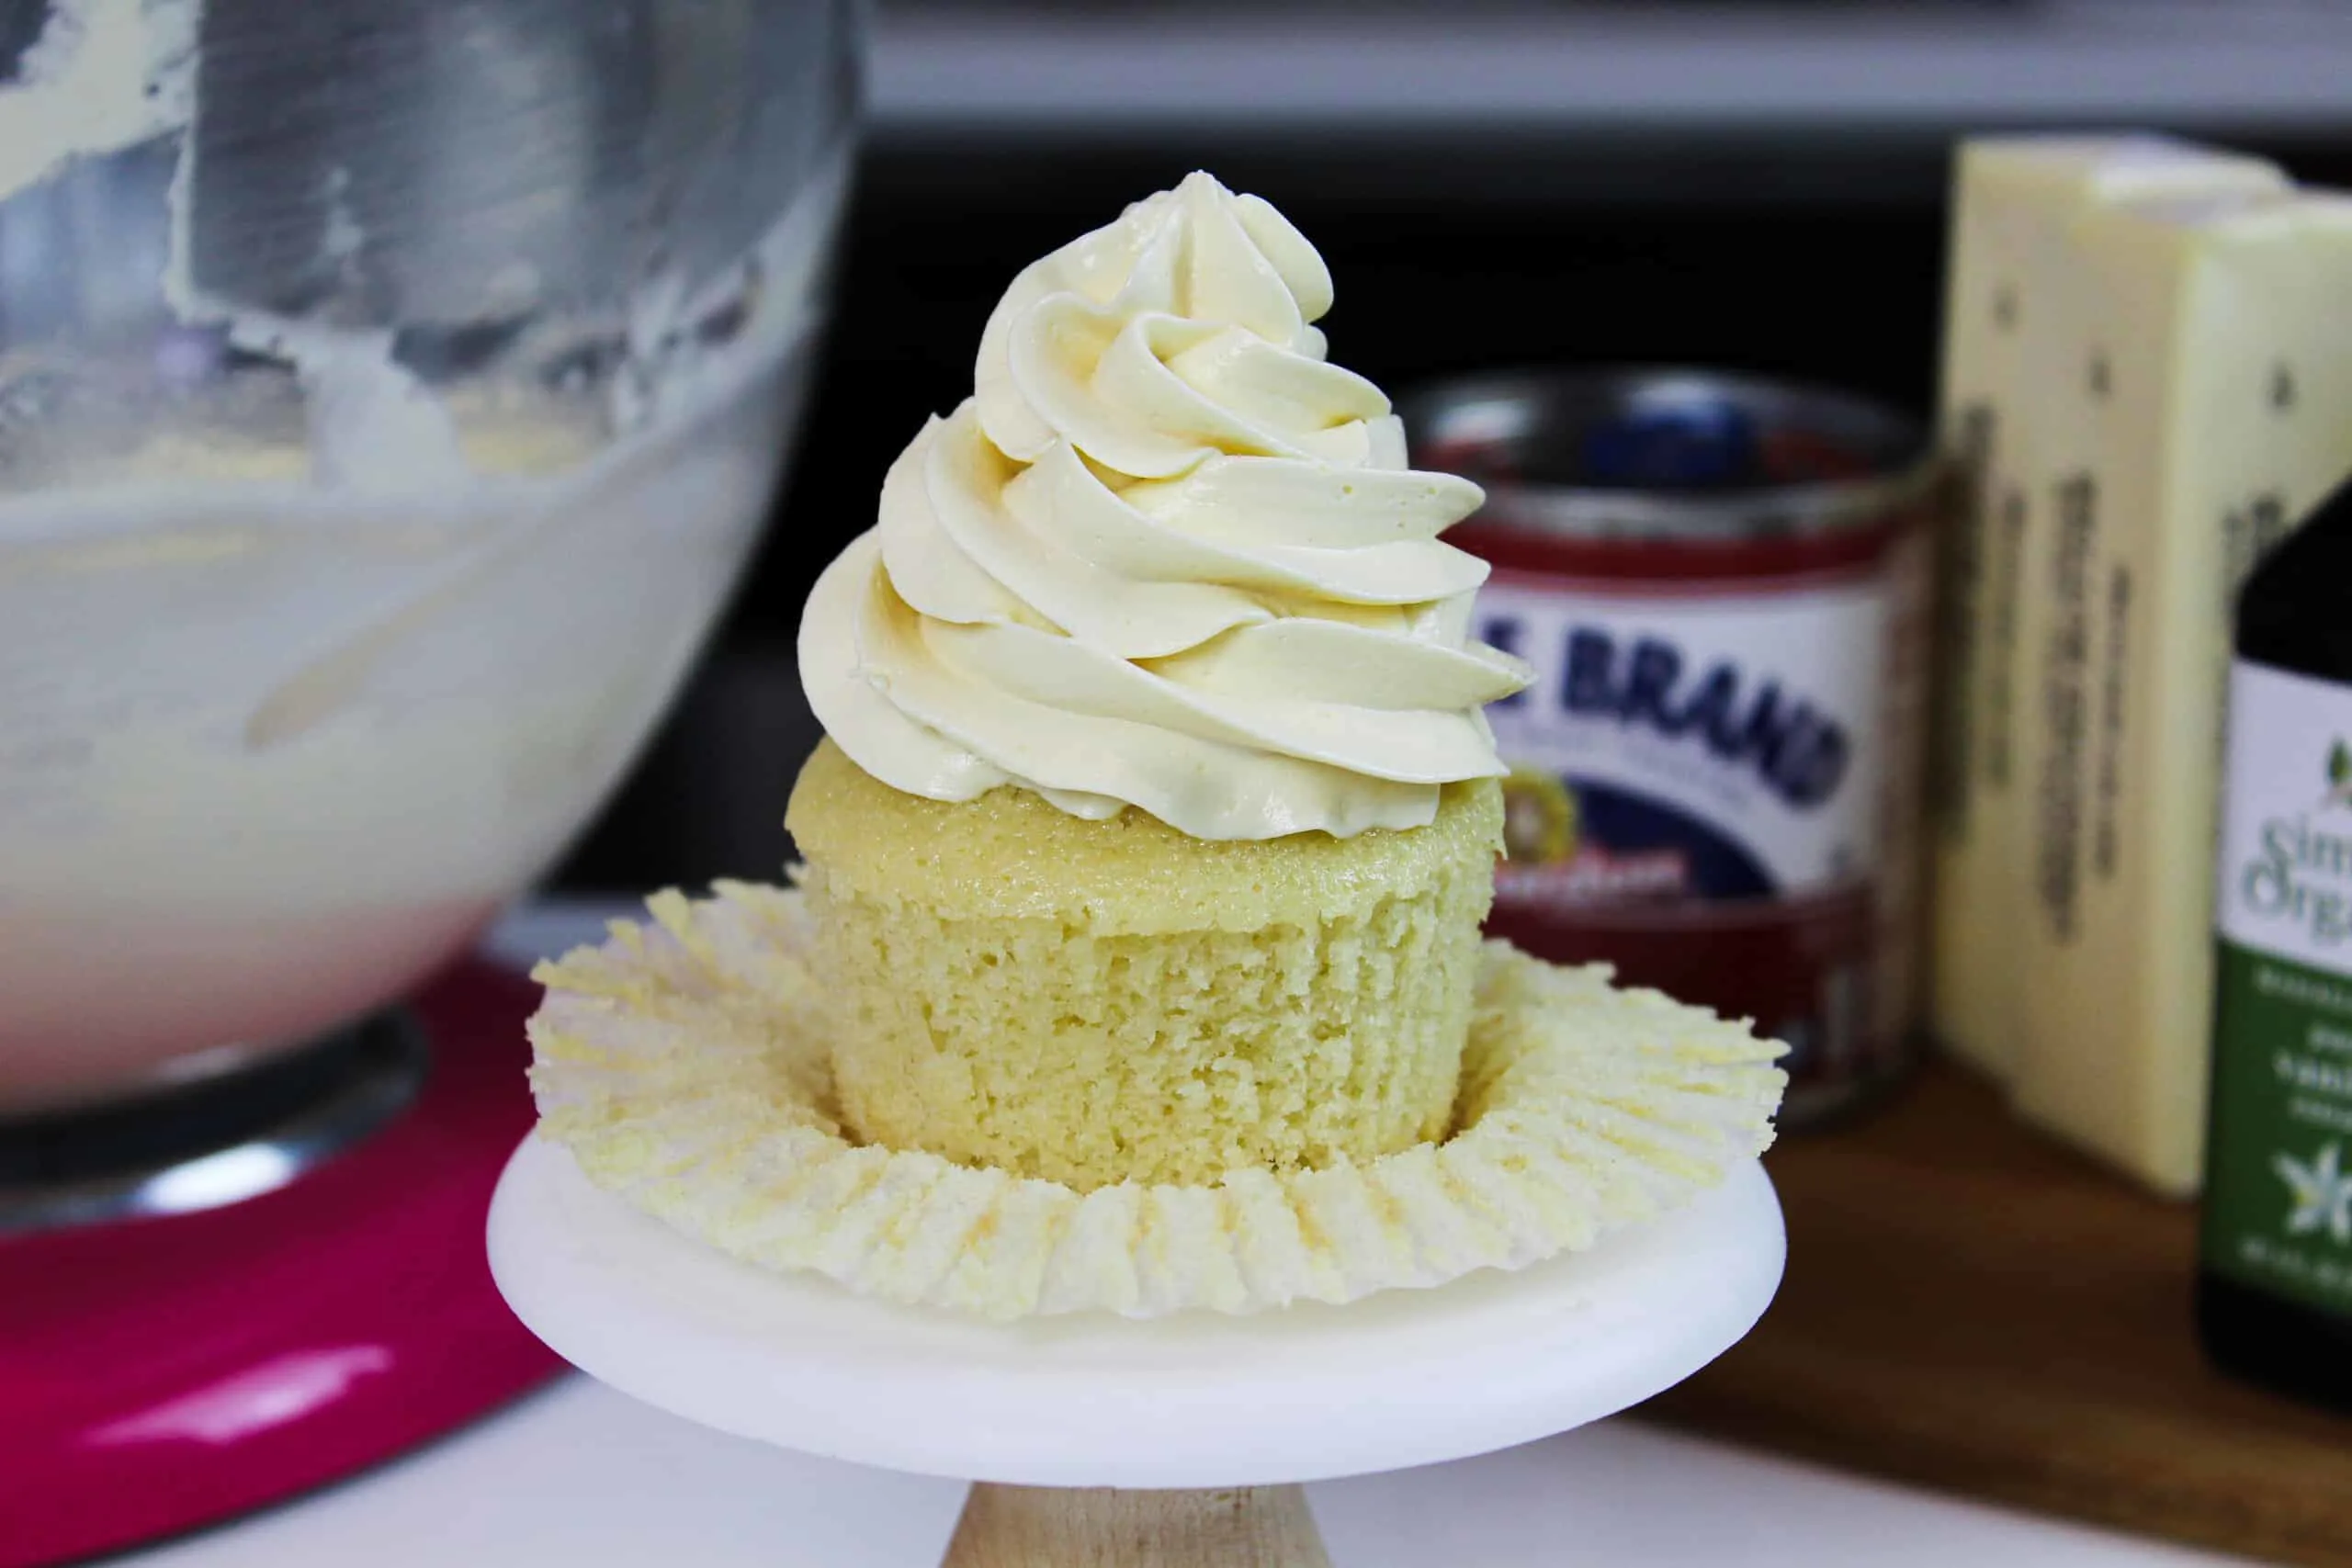 Russian Buttercream - The Easiest Frosting Recipe